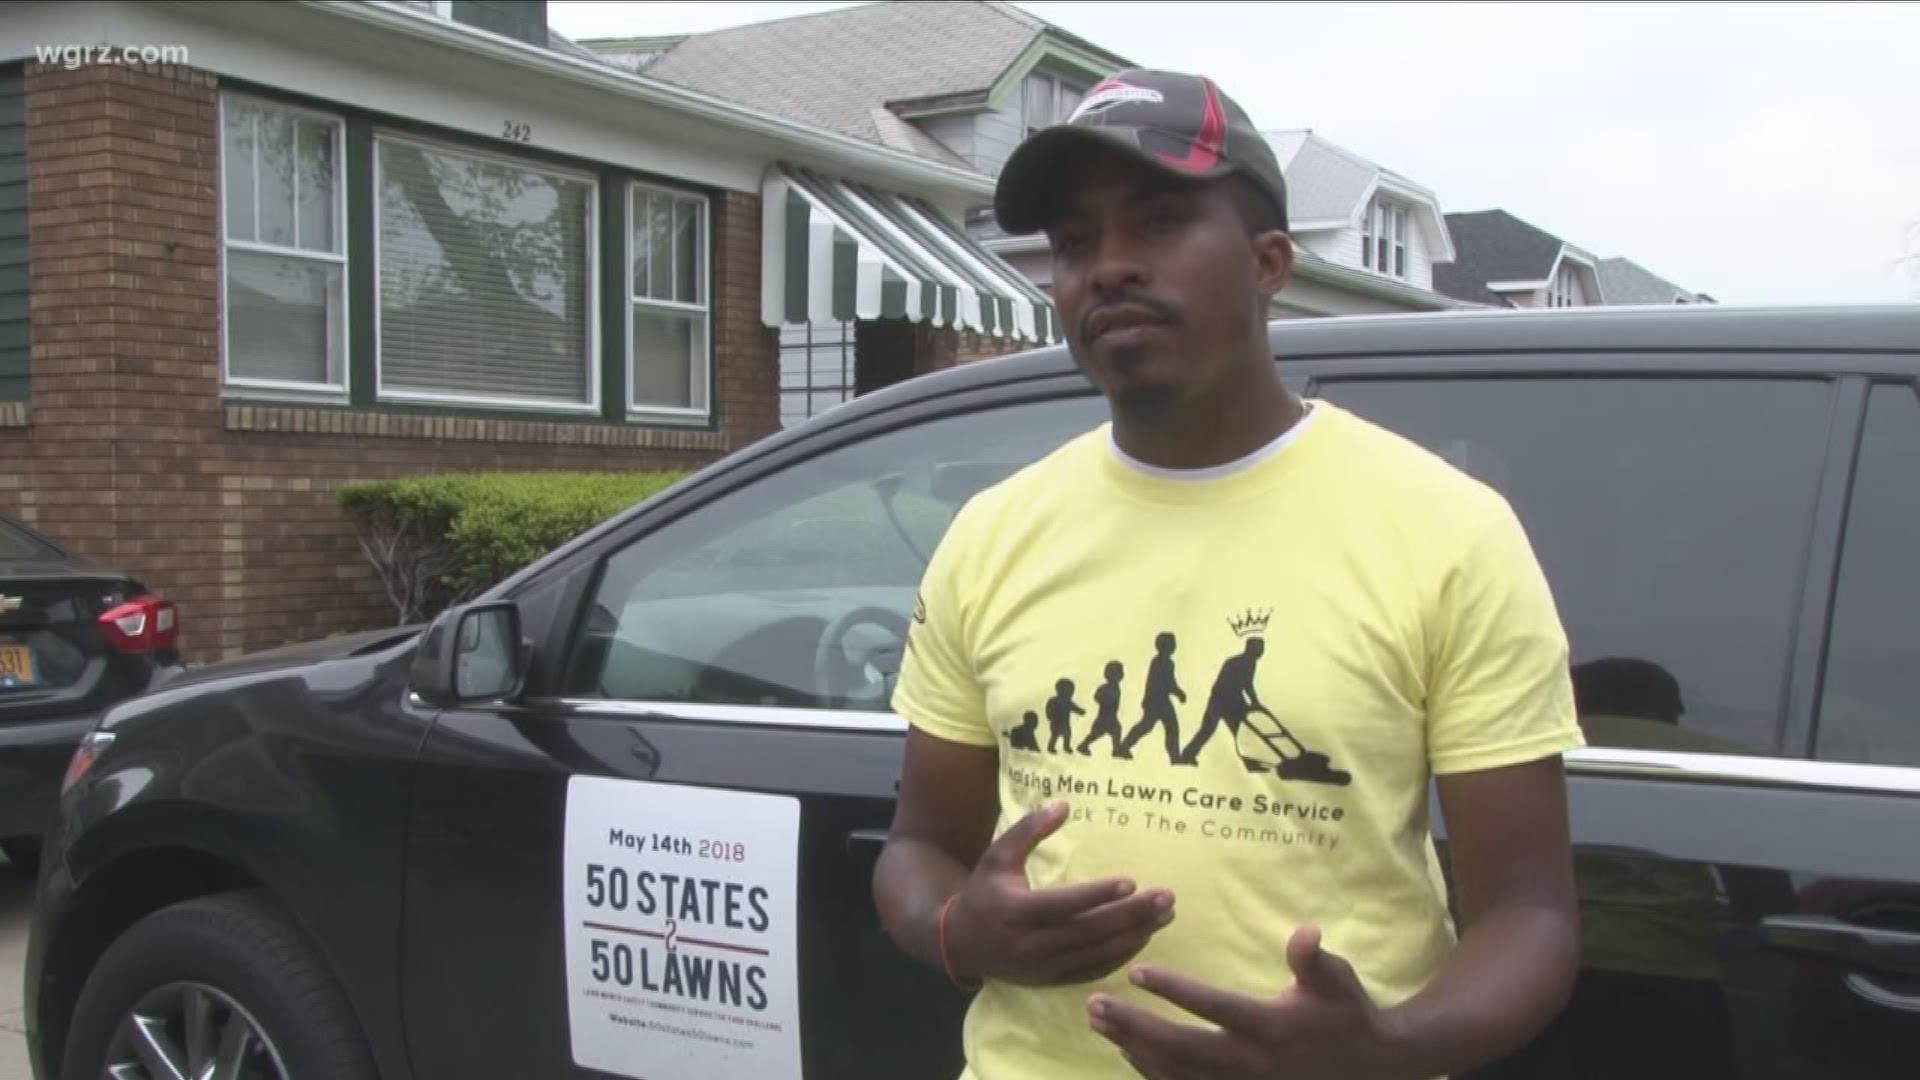 National Lawn Mowing Service comes to Buffalo